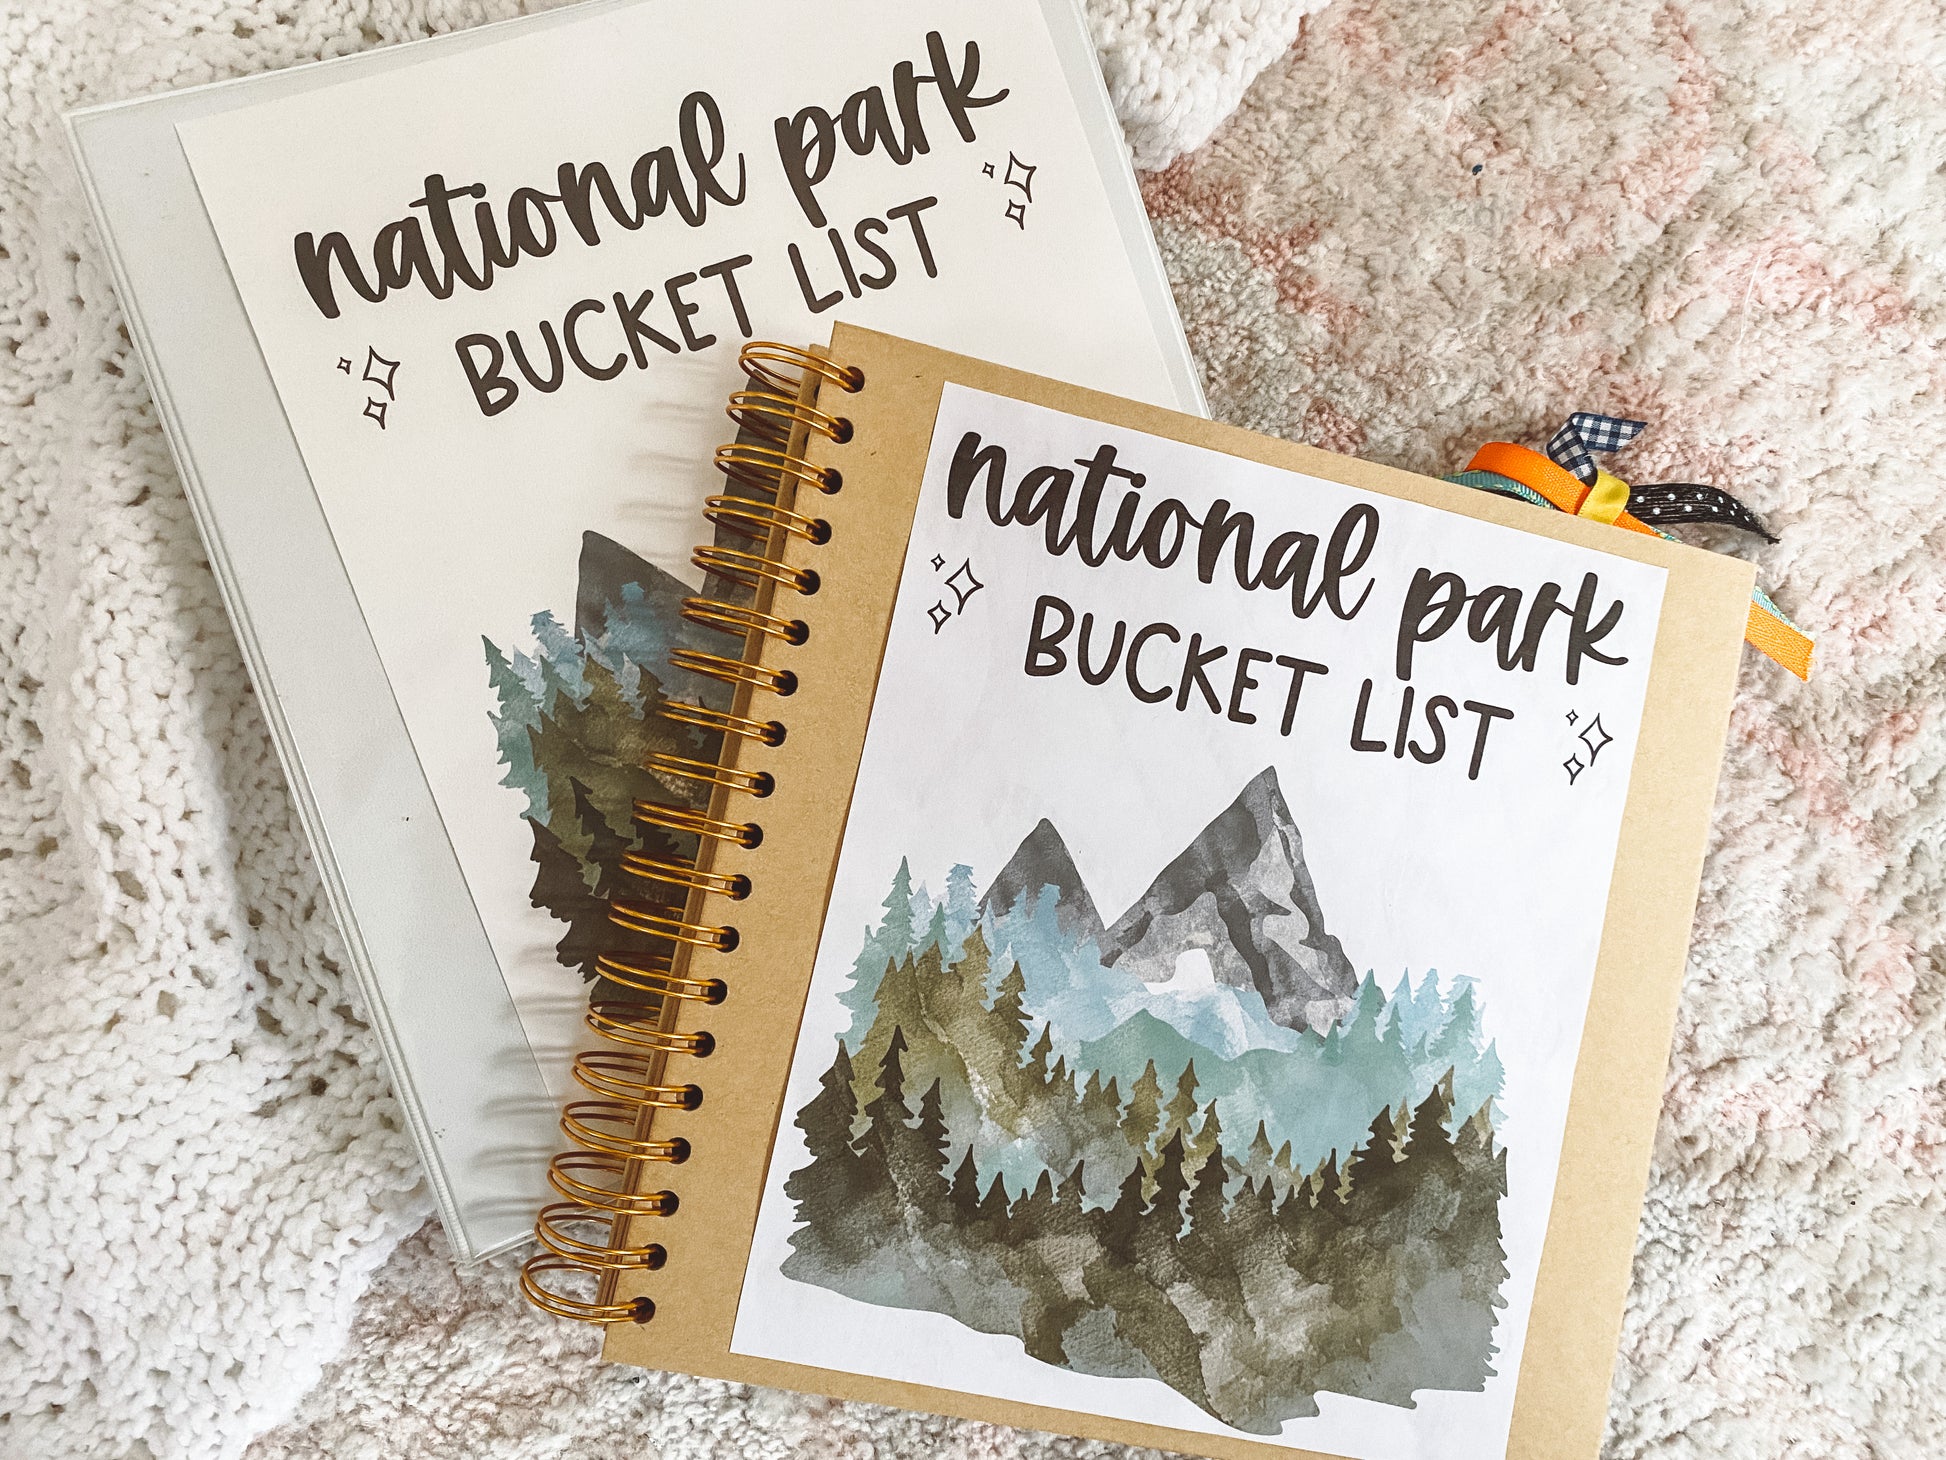 Two examples of the National Park Bucket List Journal printed. One is in a binder and the other is glued into a brown scrapbook.